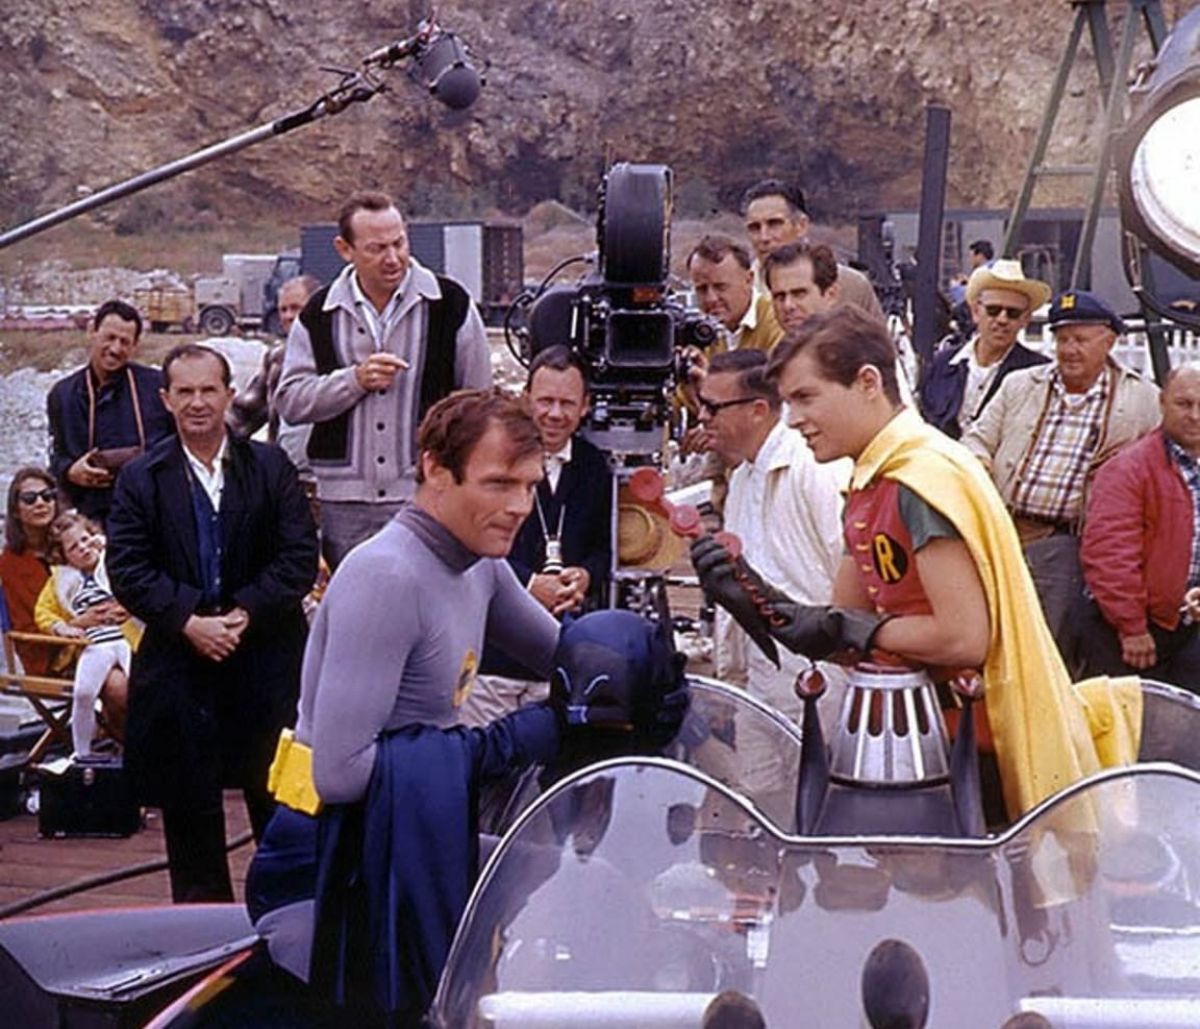 Cast and crew from 20th Century-Fox Studios on location filming a feature-length version of Batman, nation’s most popular TV series. Batman (Adam West) and Robin (Burt Ward) are shown in foreground rehearsing a scene with Batmobile and Batphone, while Director Les Martinson (under camera) and Director of Photography Howard Schwartz, ASC (in striped-V sweater), check the action.